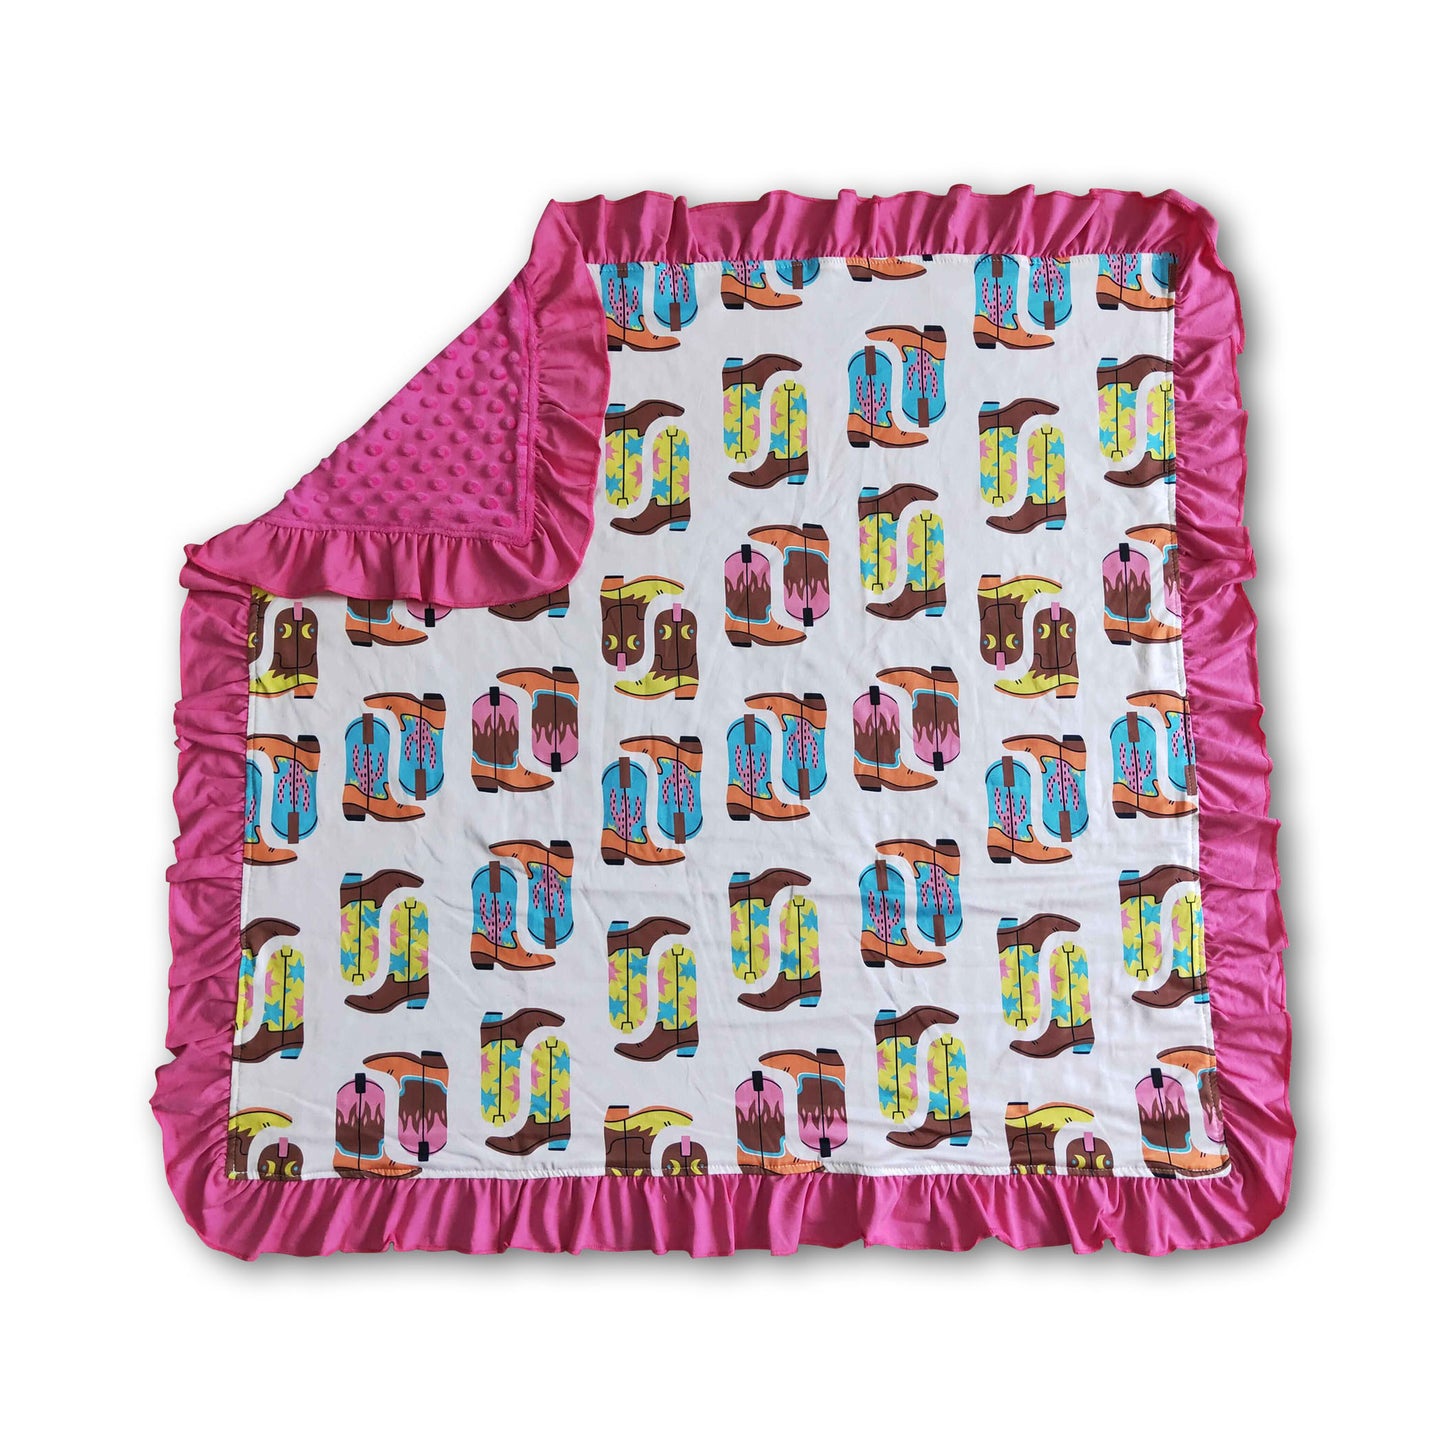 Boots print hot pink minky baby ruffle blankets